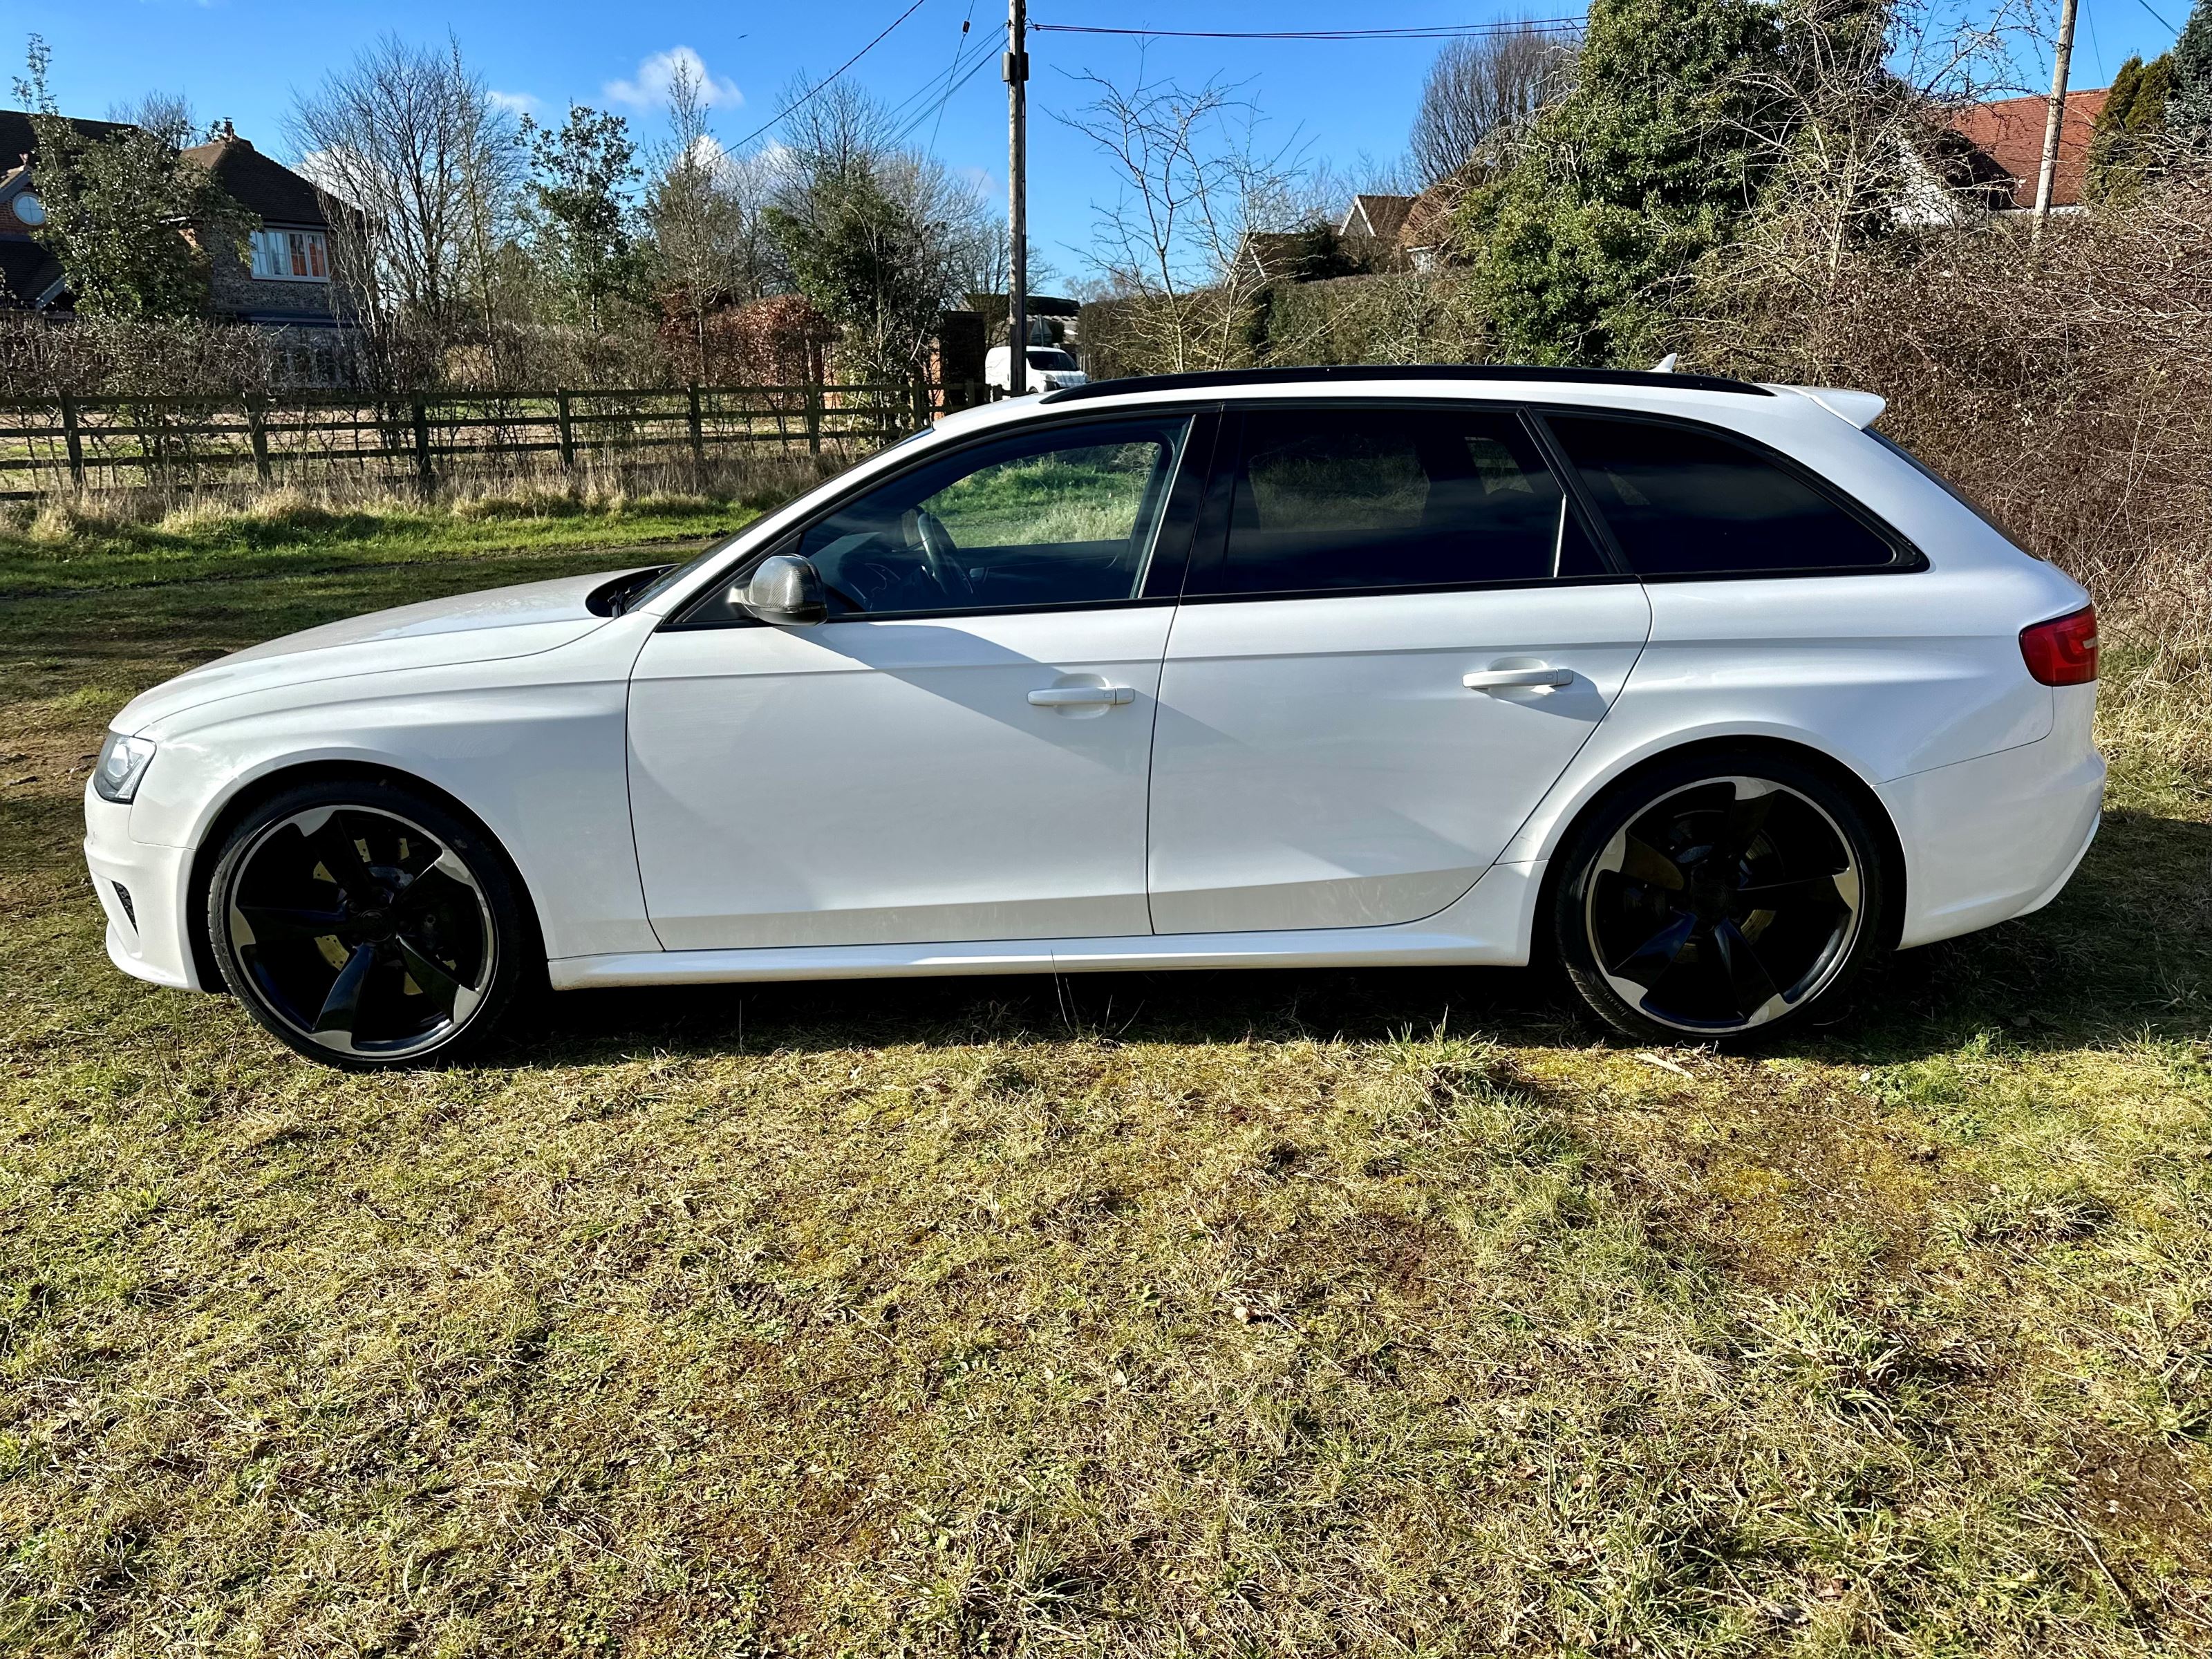 Audi rs4 zxephtup9ymym6bpph45o